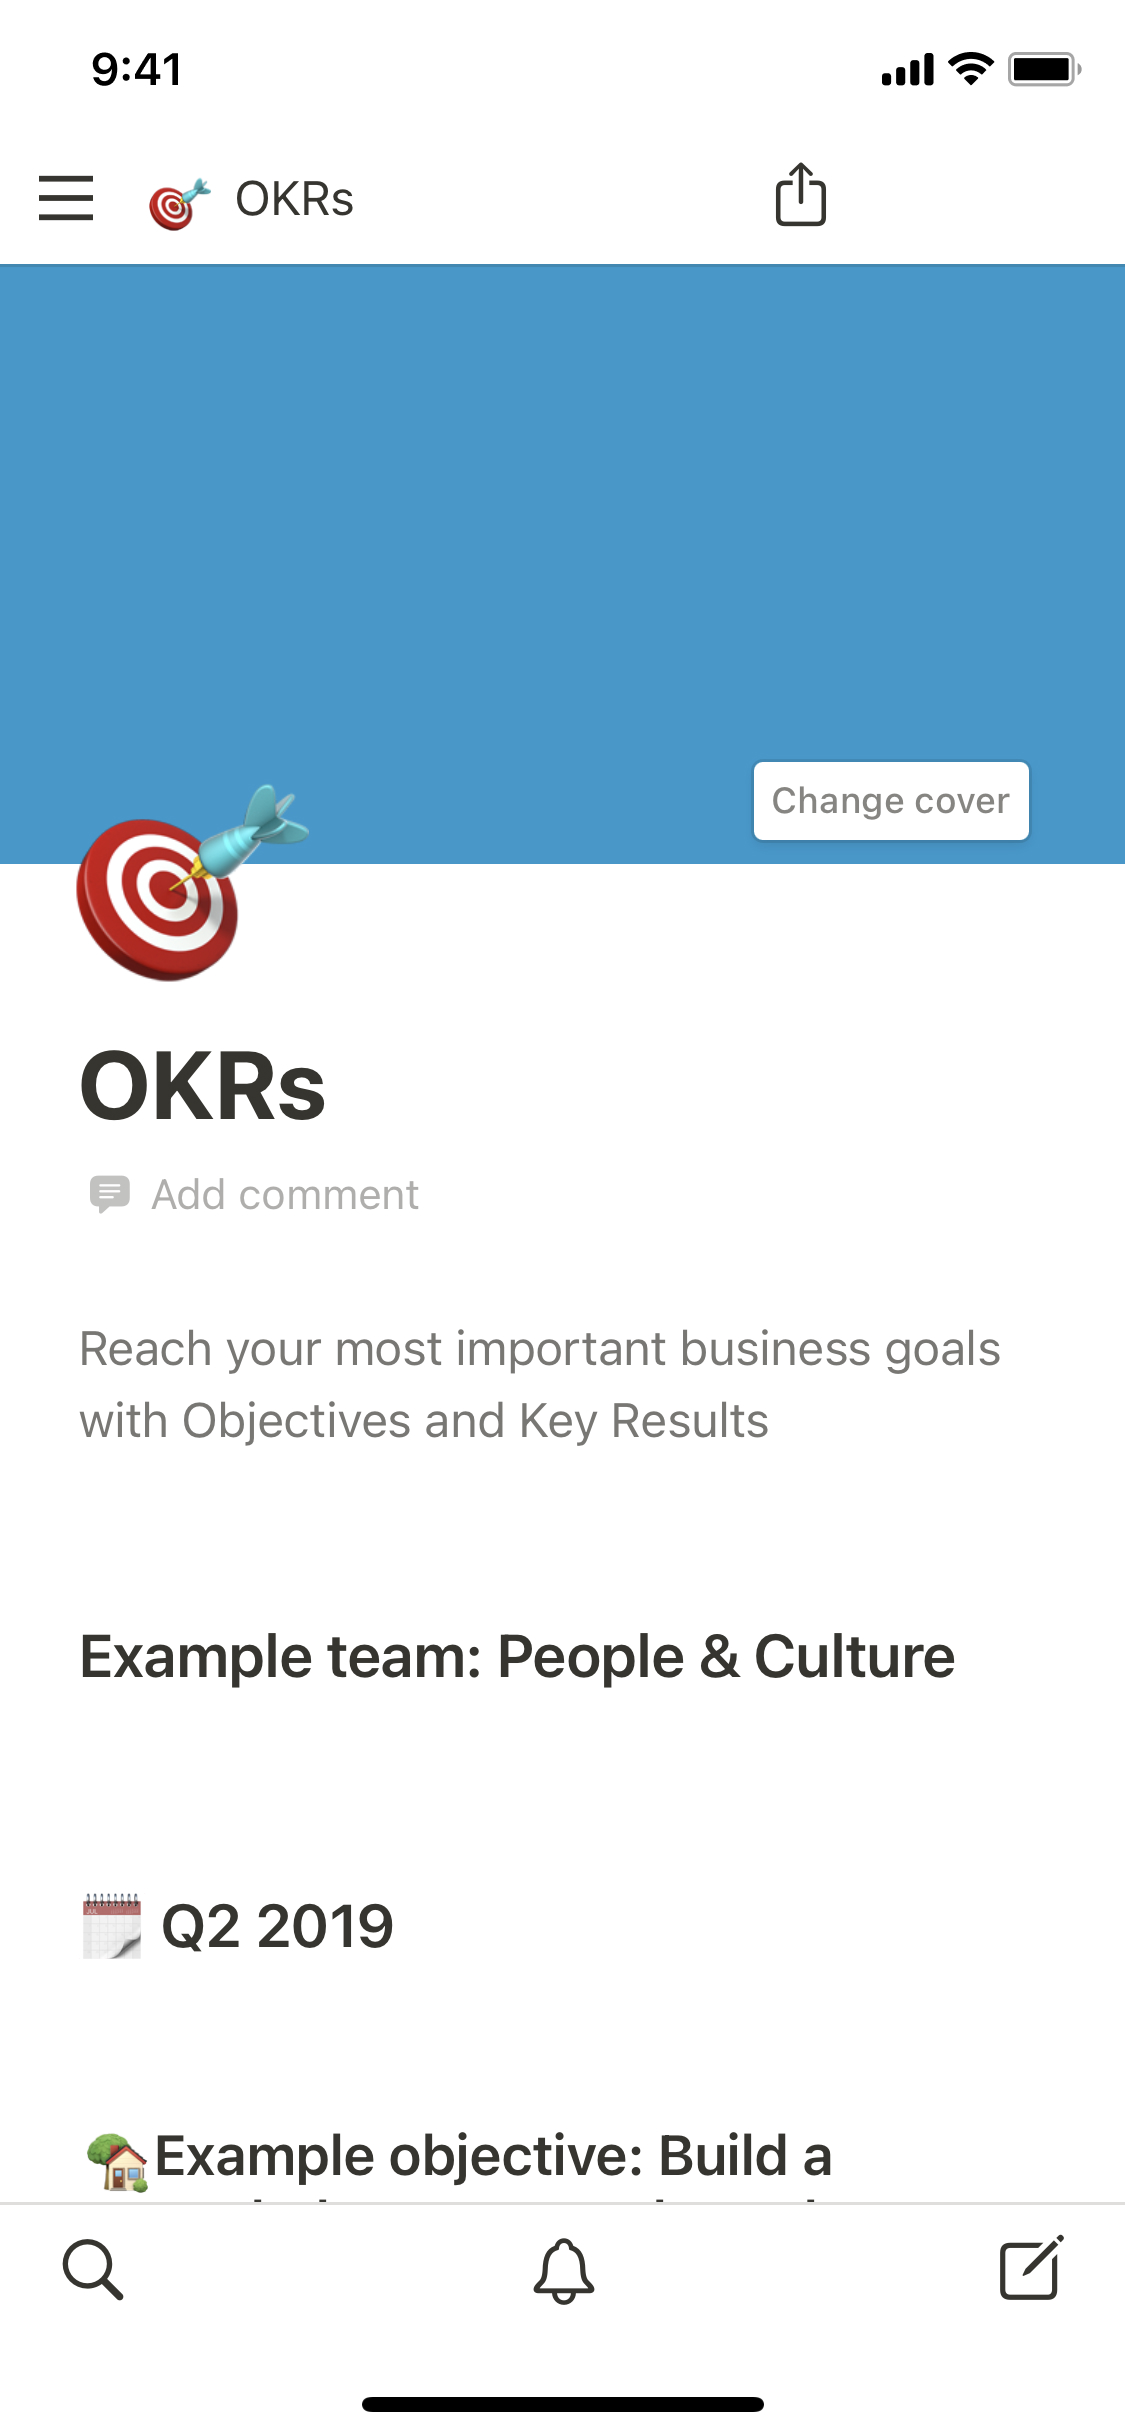 The mobile image for the OKRs template